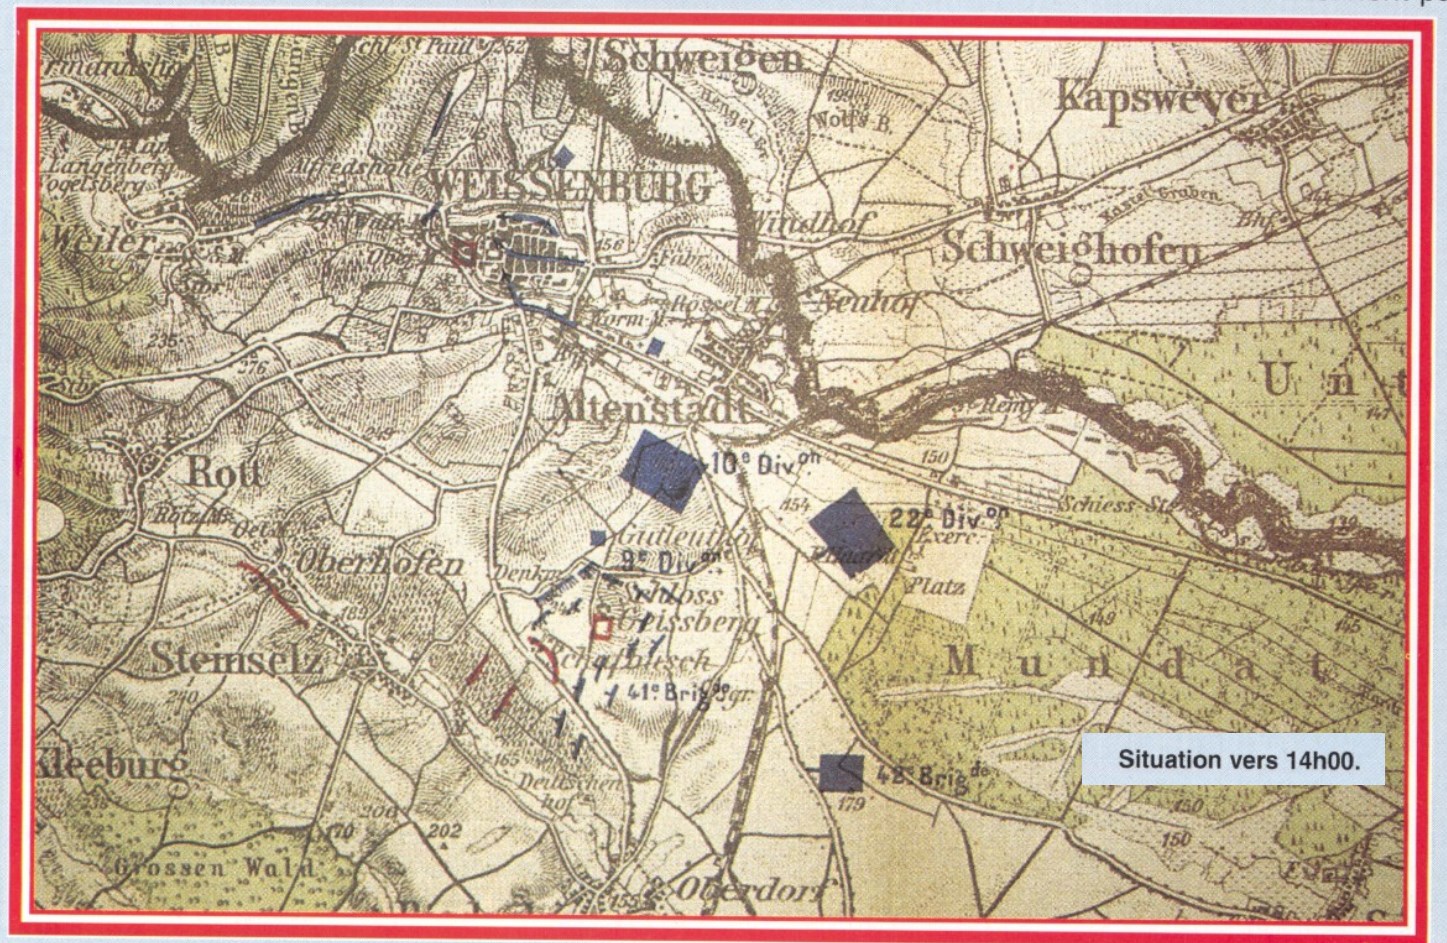 1706444672 581 The Battle of Wissembourg 4 August 1870 Part II